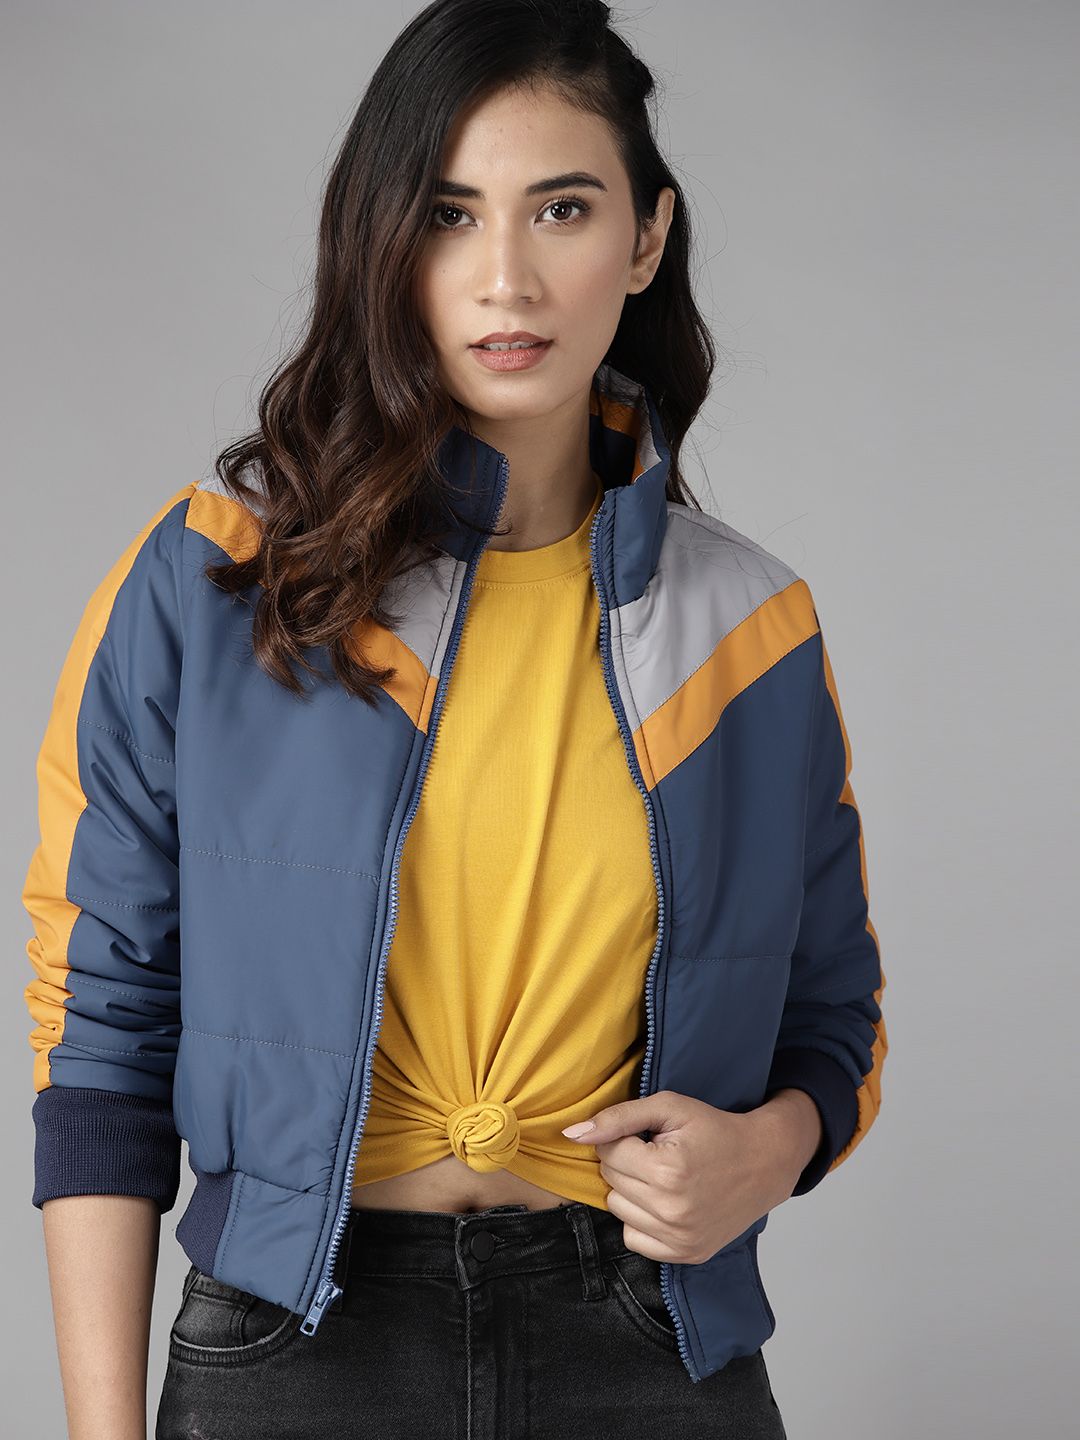 Roadster Women Navy Blue Grey Striped Bomber Jacket Price in India